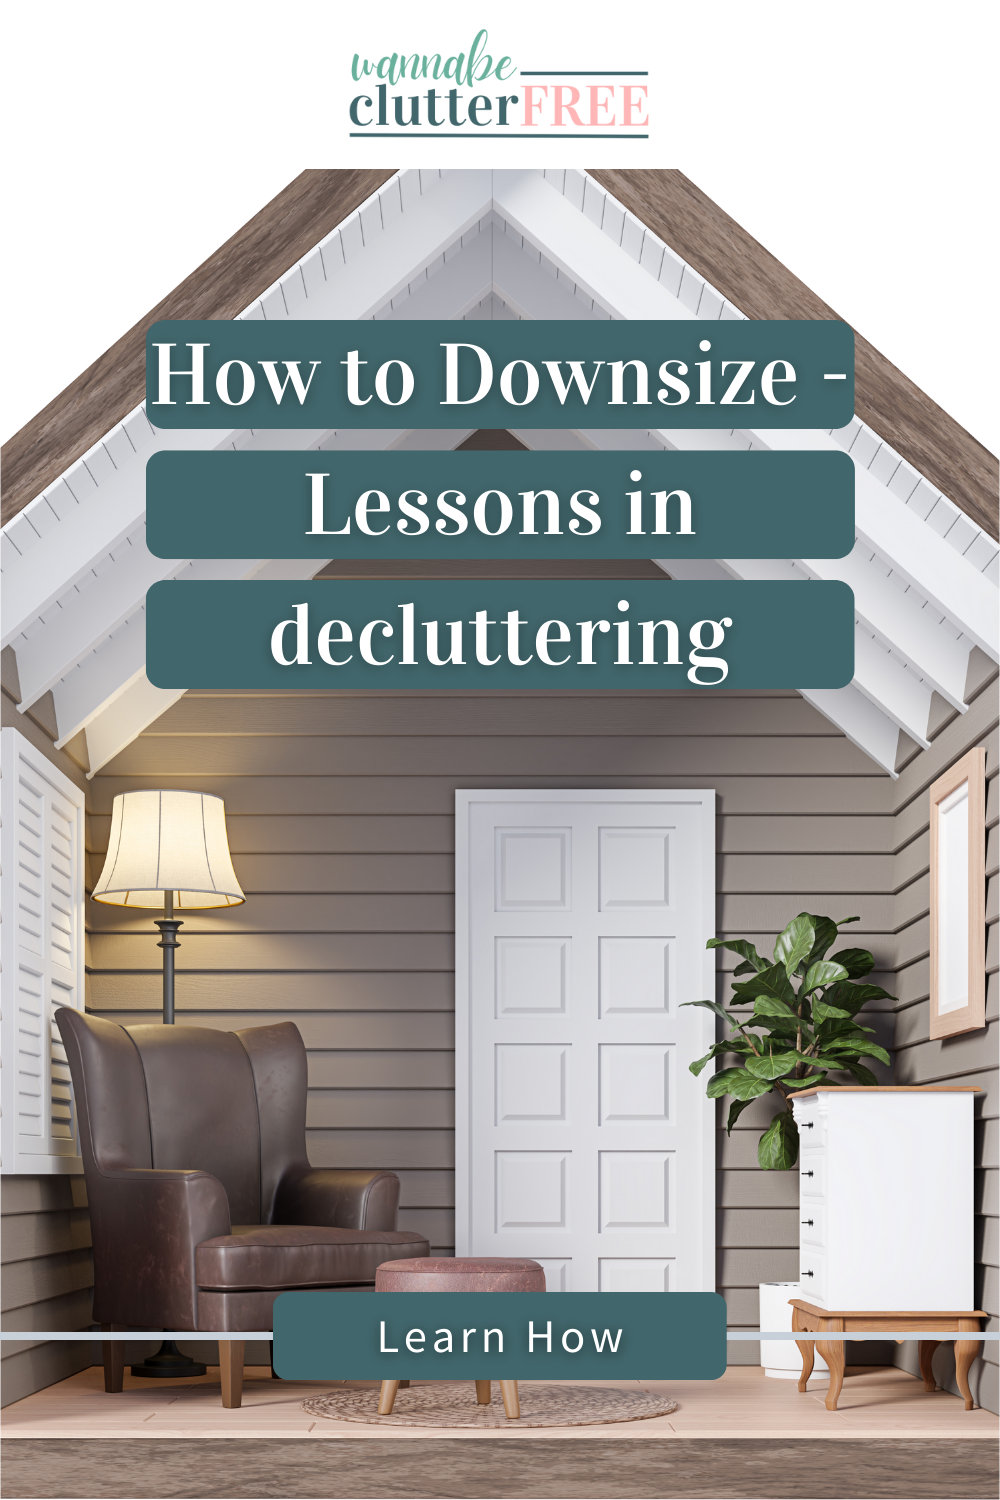 How to downsize - lessons in decluttering